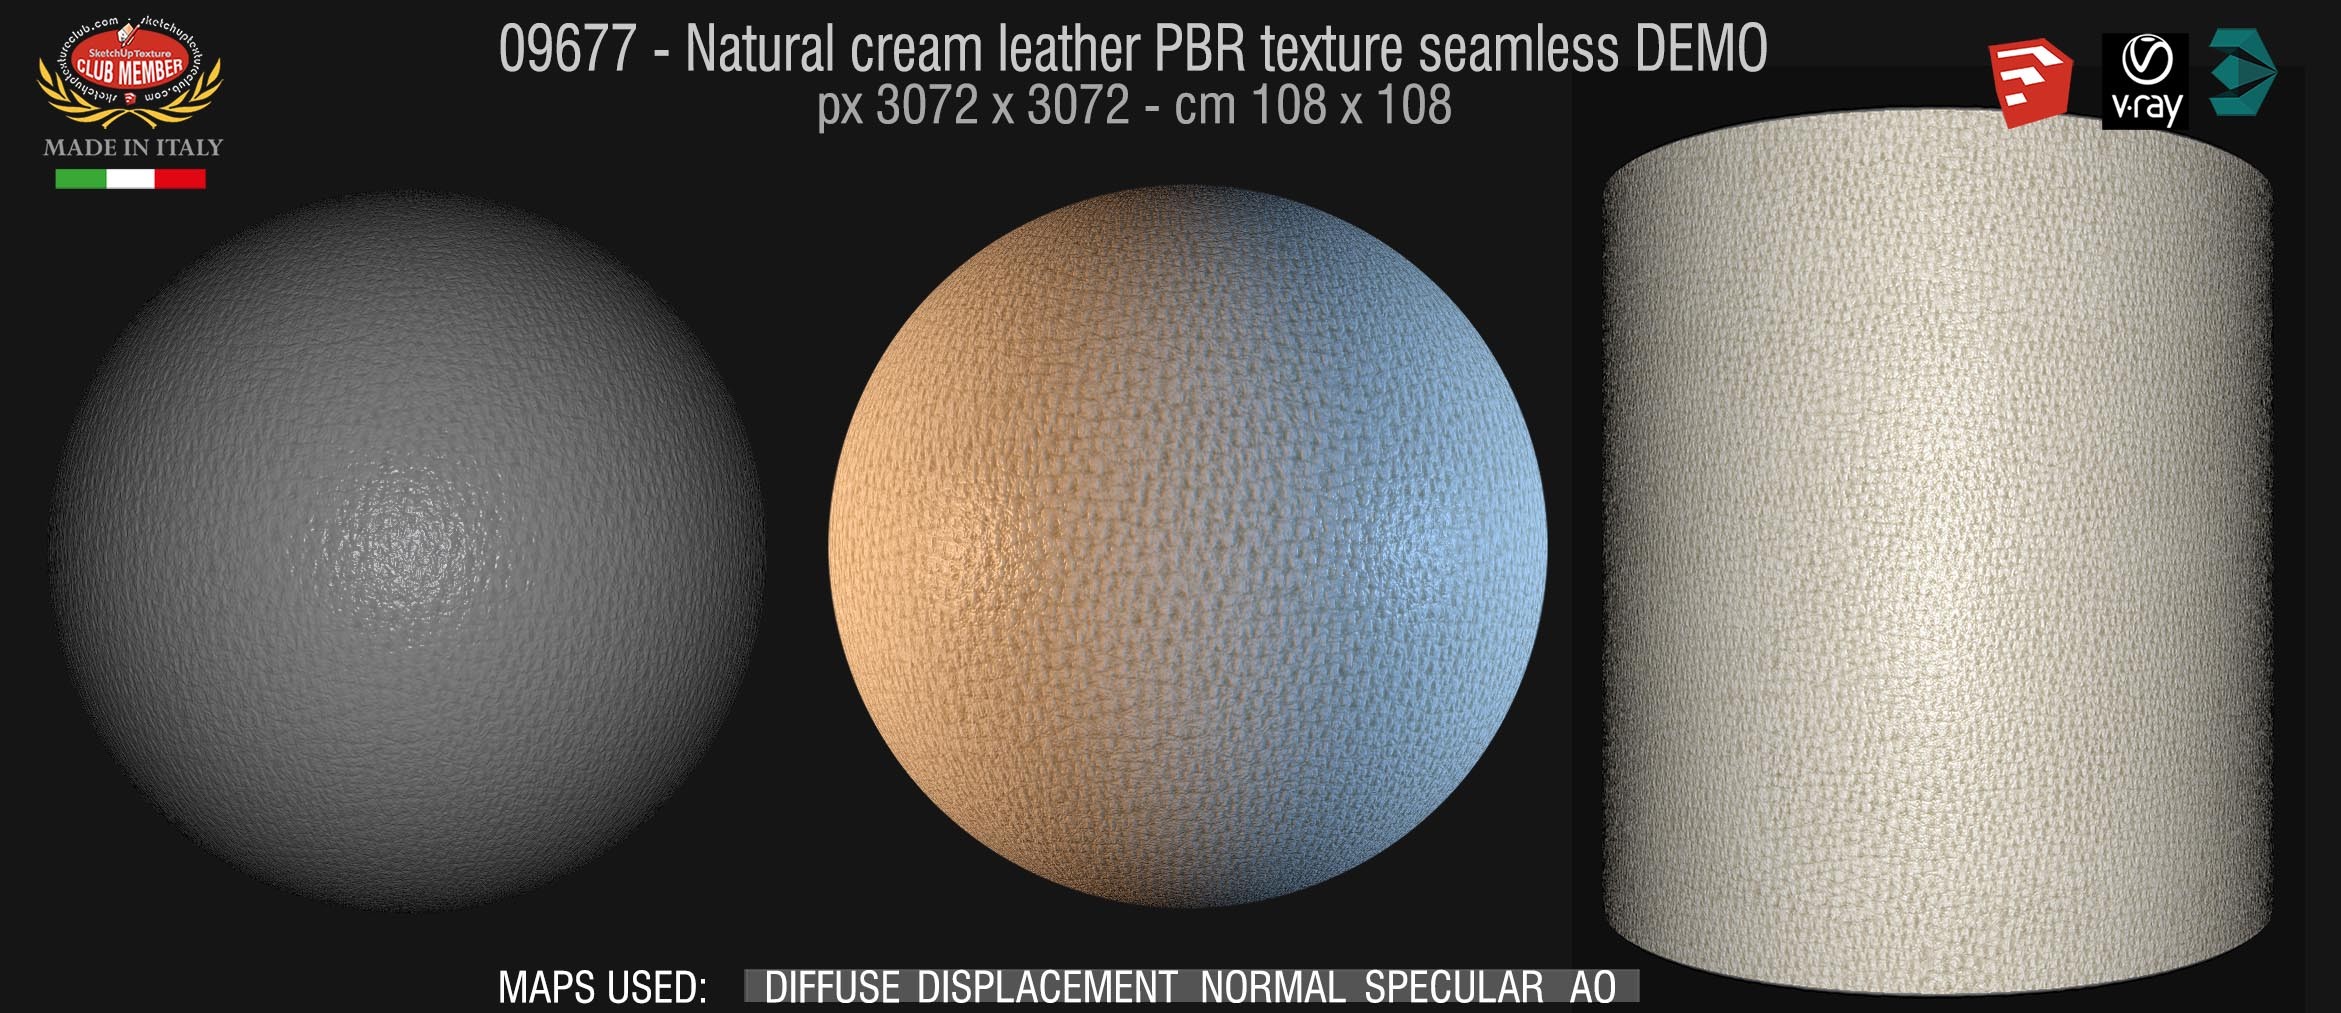 09677 Natural cream leather PBR texture seamless DEMO